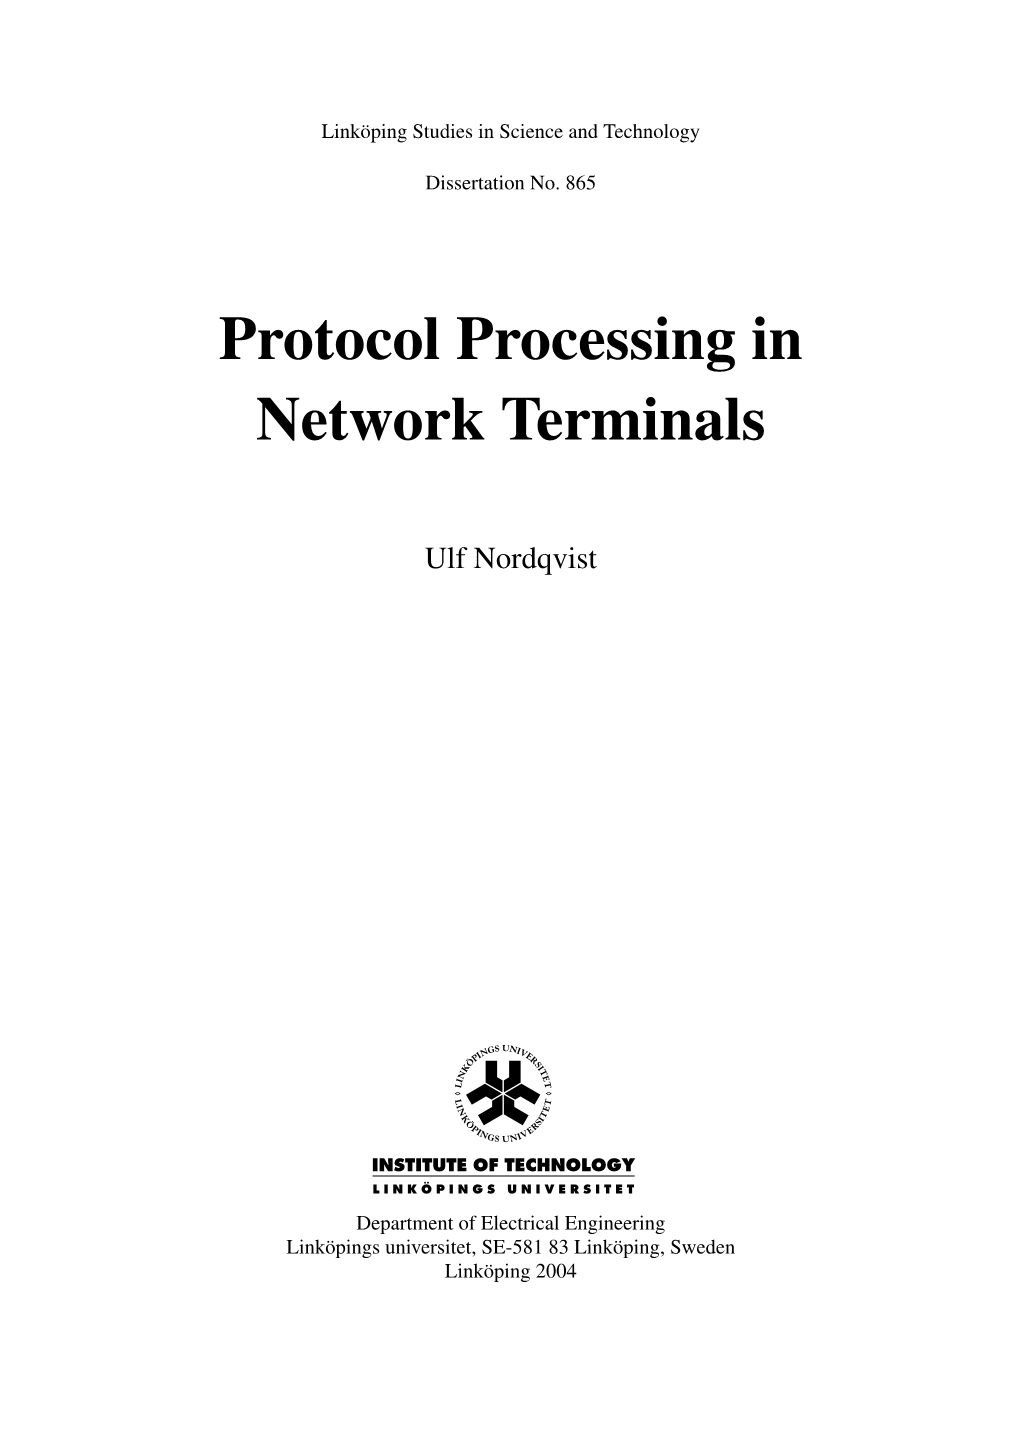 Protocol Processing in Network Terminals